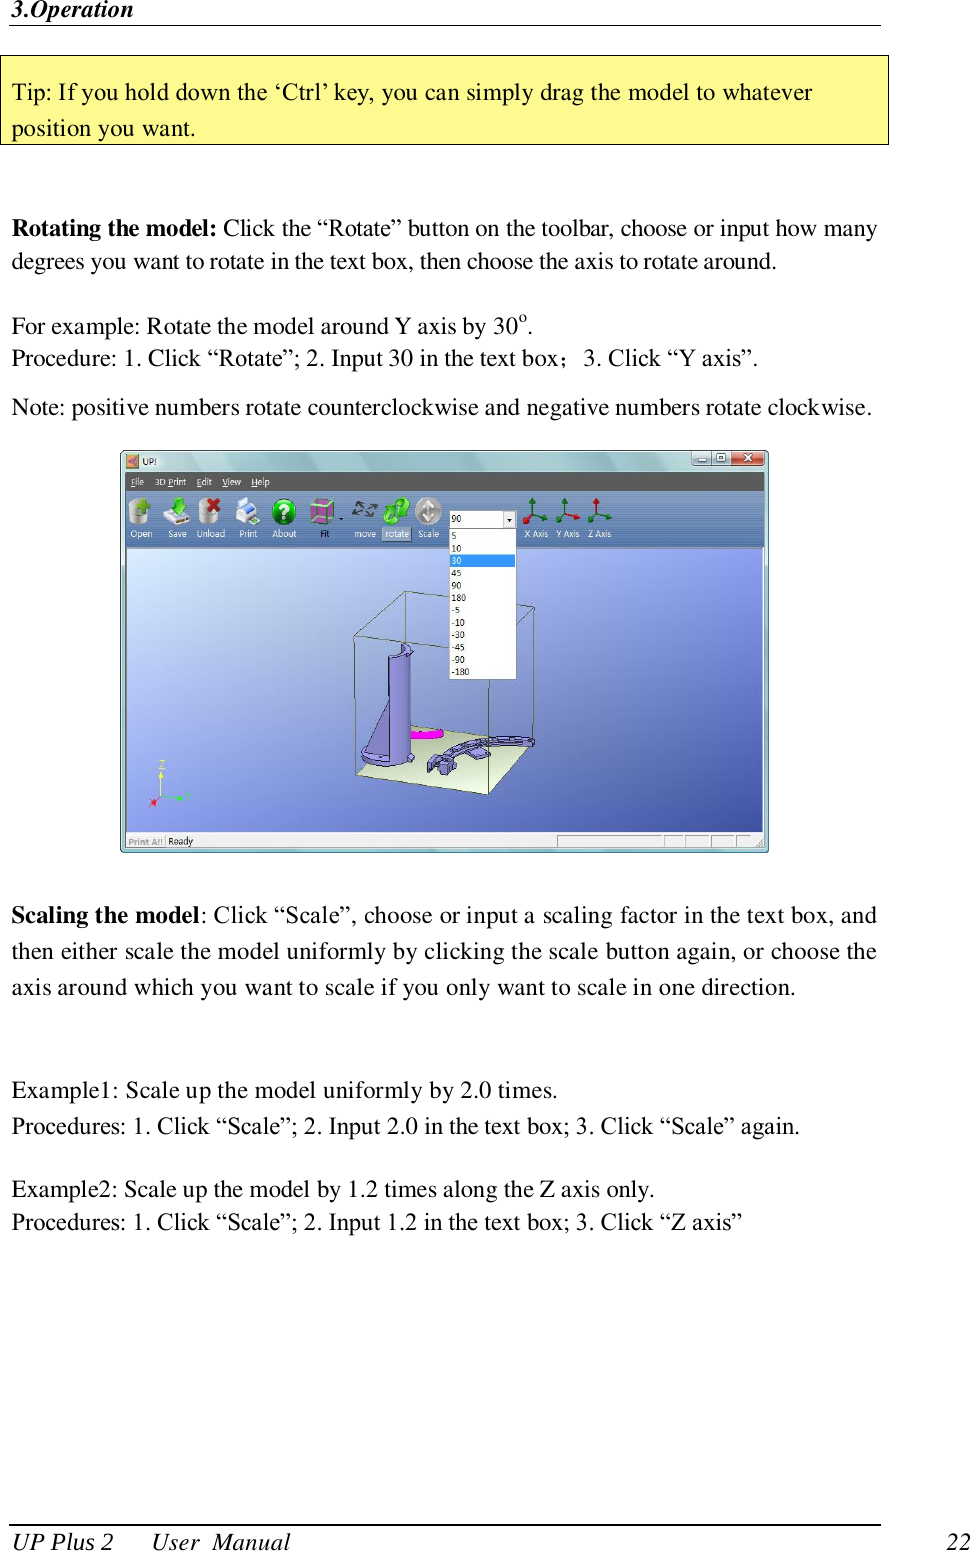 3.Operation UP Plus 2      User  Manual                                22 Tip: If you hold down the ‗Ctrl‘ key, you can simply drag the model to whatever position you want.  Rotating the model: Click the ―Rotate‖ button on the toolbar, choose or input how many degrees you want to rotate in the text box, then choose the axis to rotate around.  For example: Rotate the model around Y axis by 30o.   Procedure: 1. Click ―Rotate‖; 2. Input 30 in the text box；3. Click ―Y axis‖.   Note: positive numbers rotate counterclockwise and negative numbers rotate clockwise.  Scaling the model: Click ―Scale‖, choose or input a scaling factor in the text box, and then either scale the model uniformly by clicking the scale button again, or choose the axis around which you want to scale if you only want to scale in one direction.  Example1: Scale up the model uniformly by 2.0 times. Procedures: 1. Click ―Scale‖; 2. Input 2.0 in the text box; 3. Click ―Scale‖ again.  Example2: Scale up the model by 1.2 times along the Z axis only.   Procedures: 1. Click ―Scale‖; 2. Input 1.2 in the text box; 3. Click ―Z axis‖ 